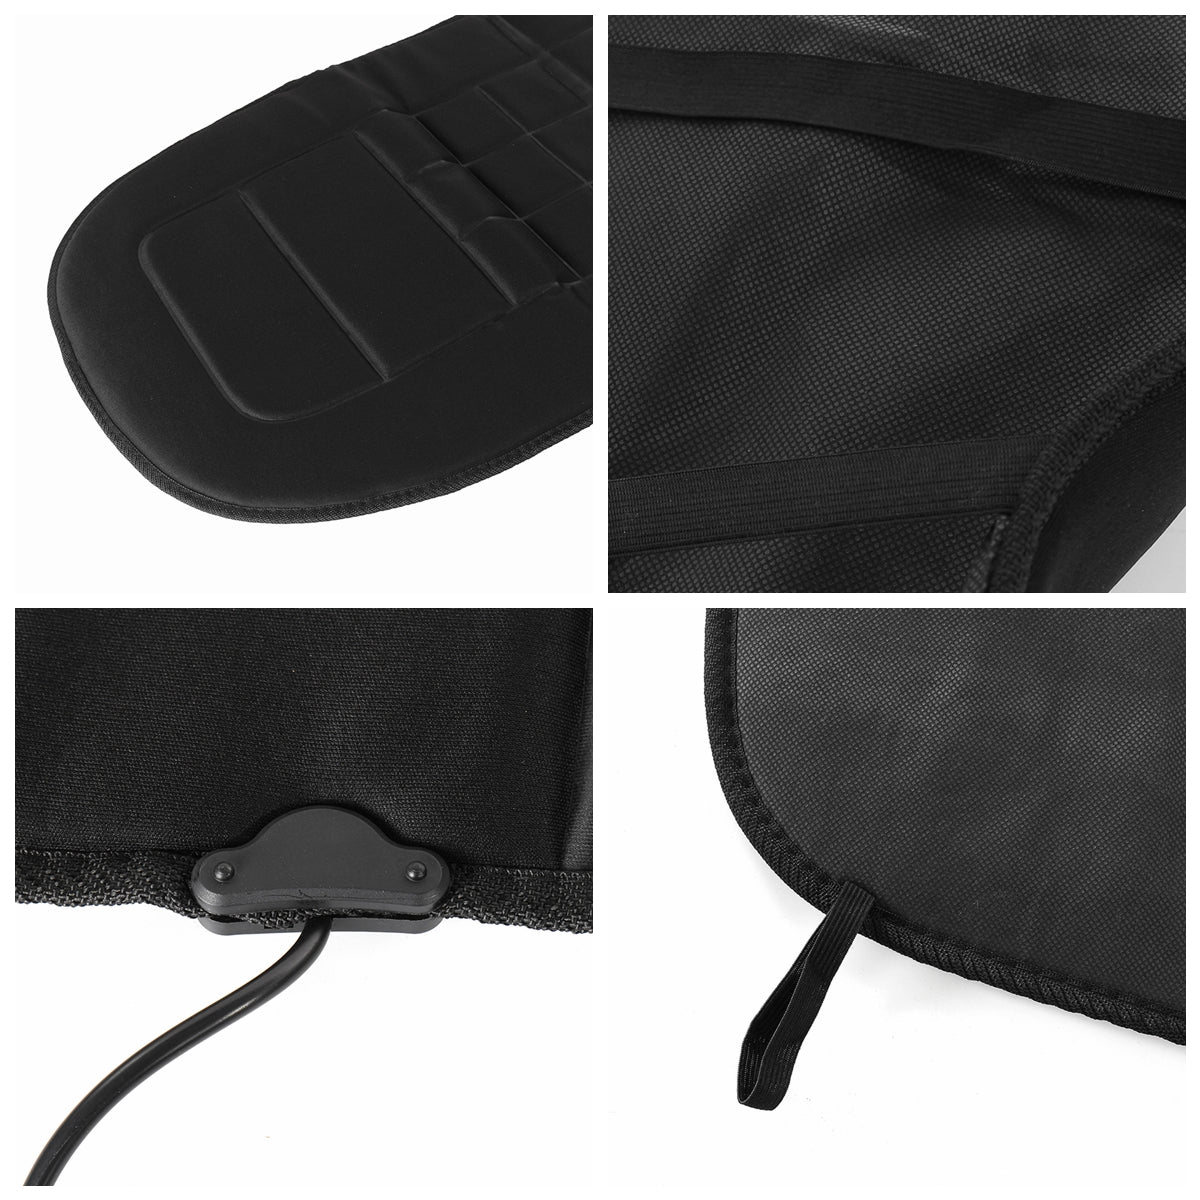 Universal 12V Electric Car Front Seat Heating Cover Padded Thermal Cushion - Auto GoShop